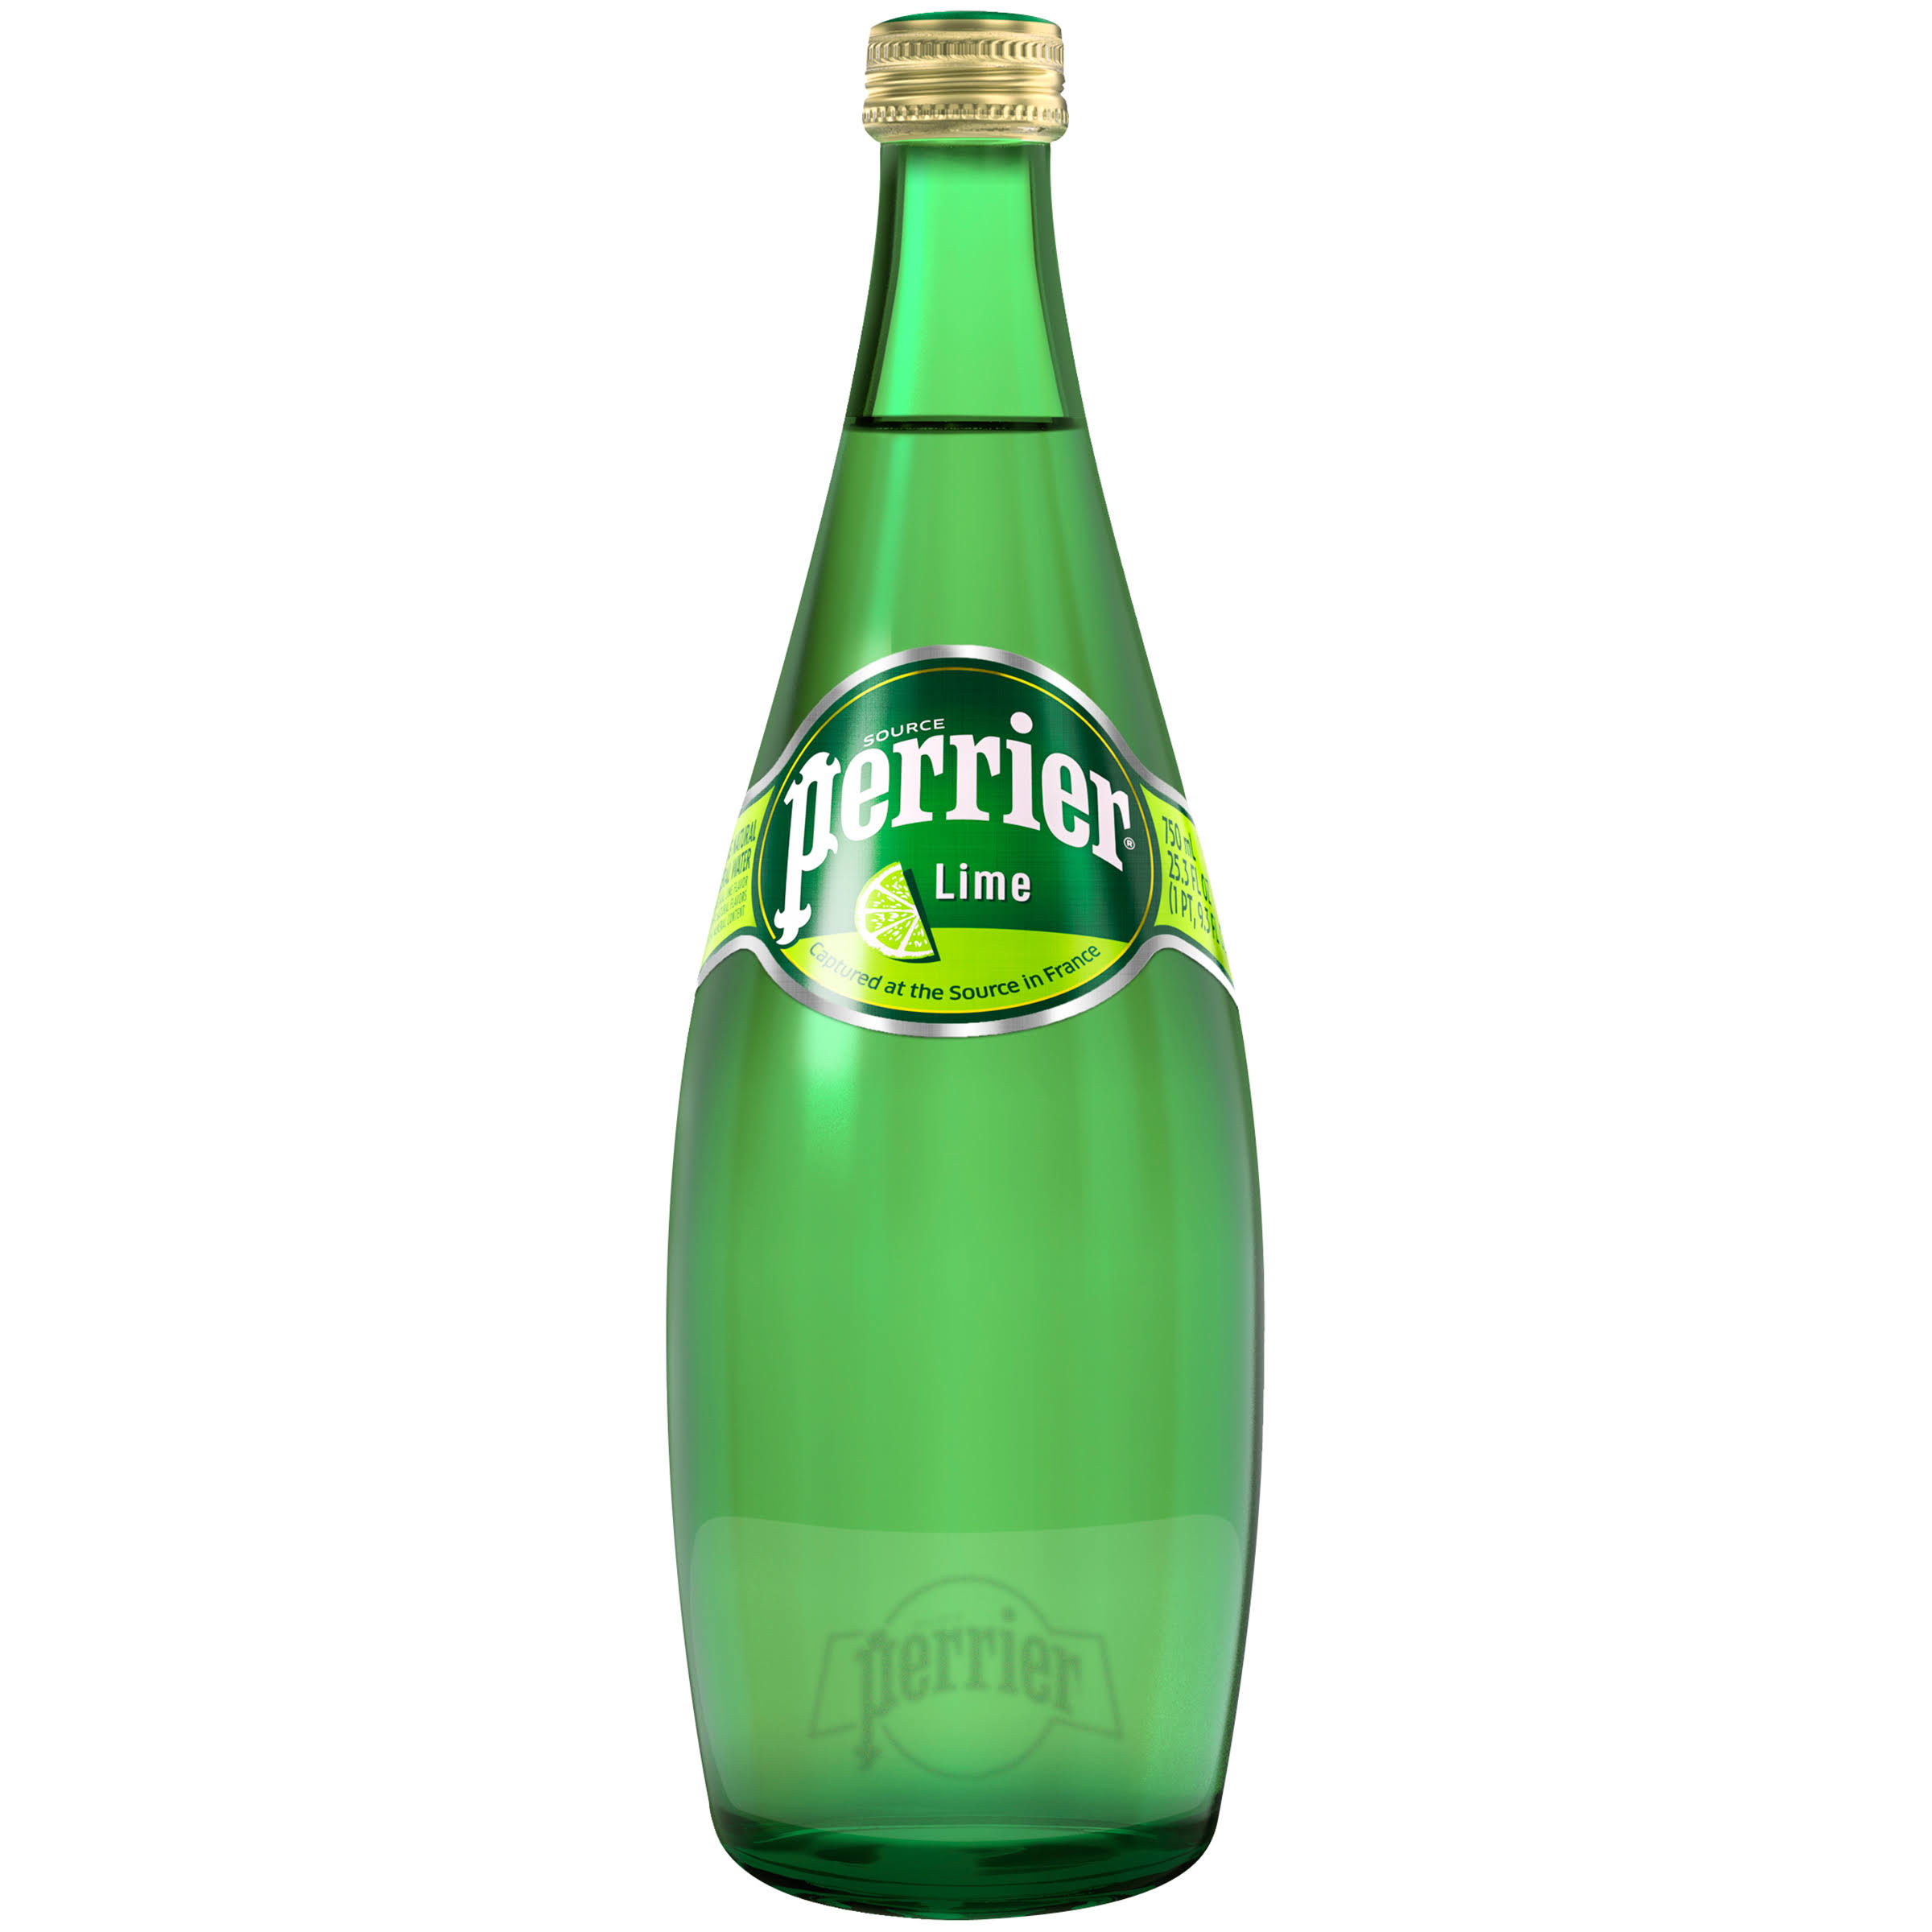 Perrier Sparkling Mineral Water - Lime